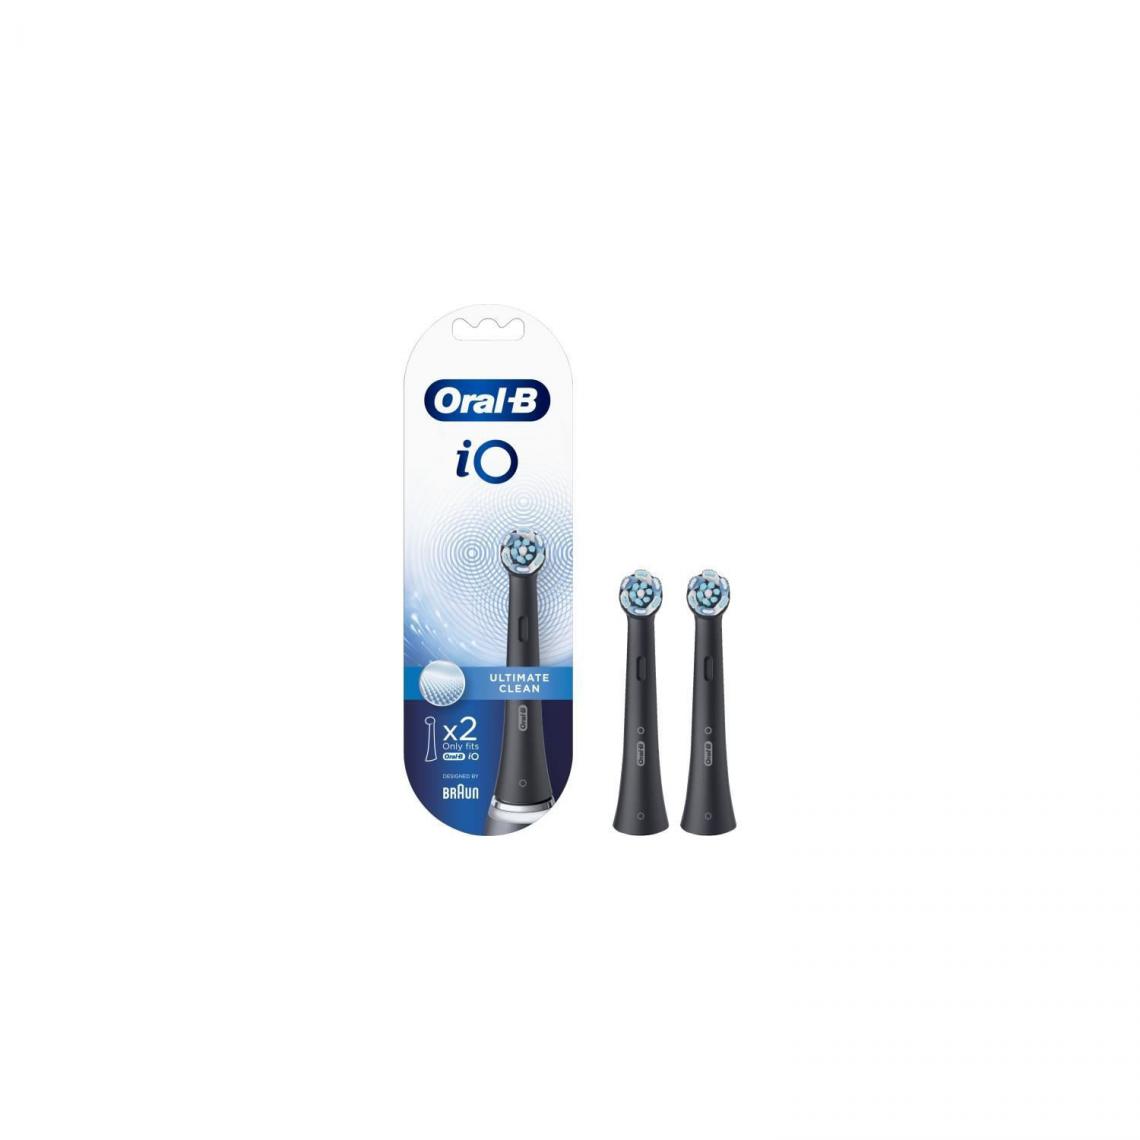 Oral-B - Oral-B iO Ultimate Clean Brossettes Noires, 2 x - Kits interdentaires